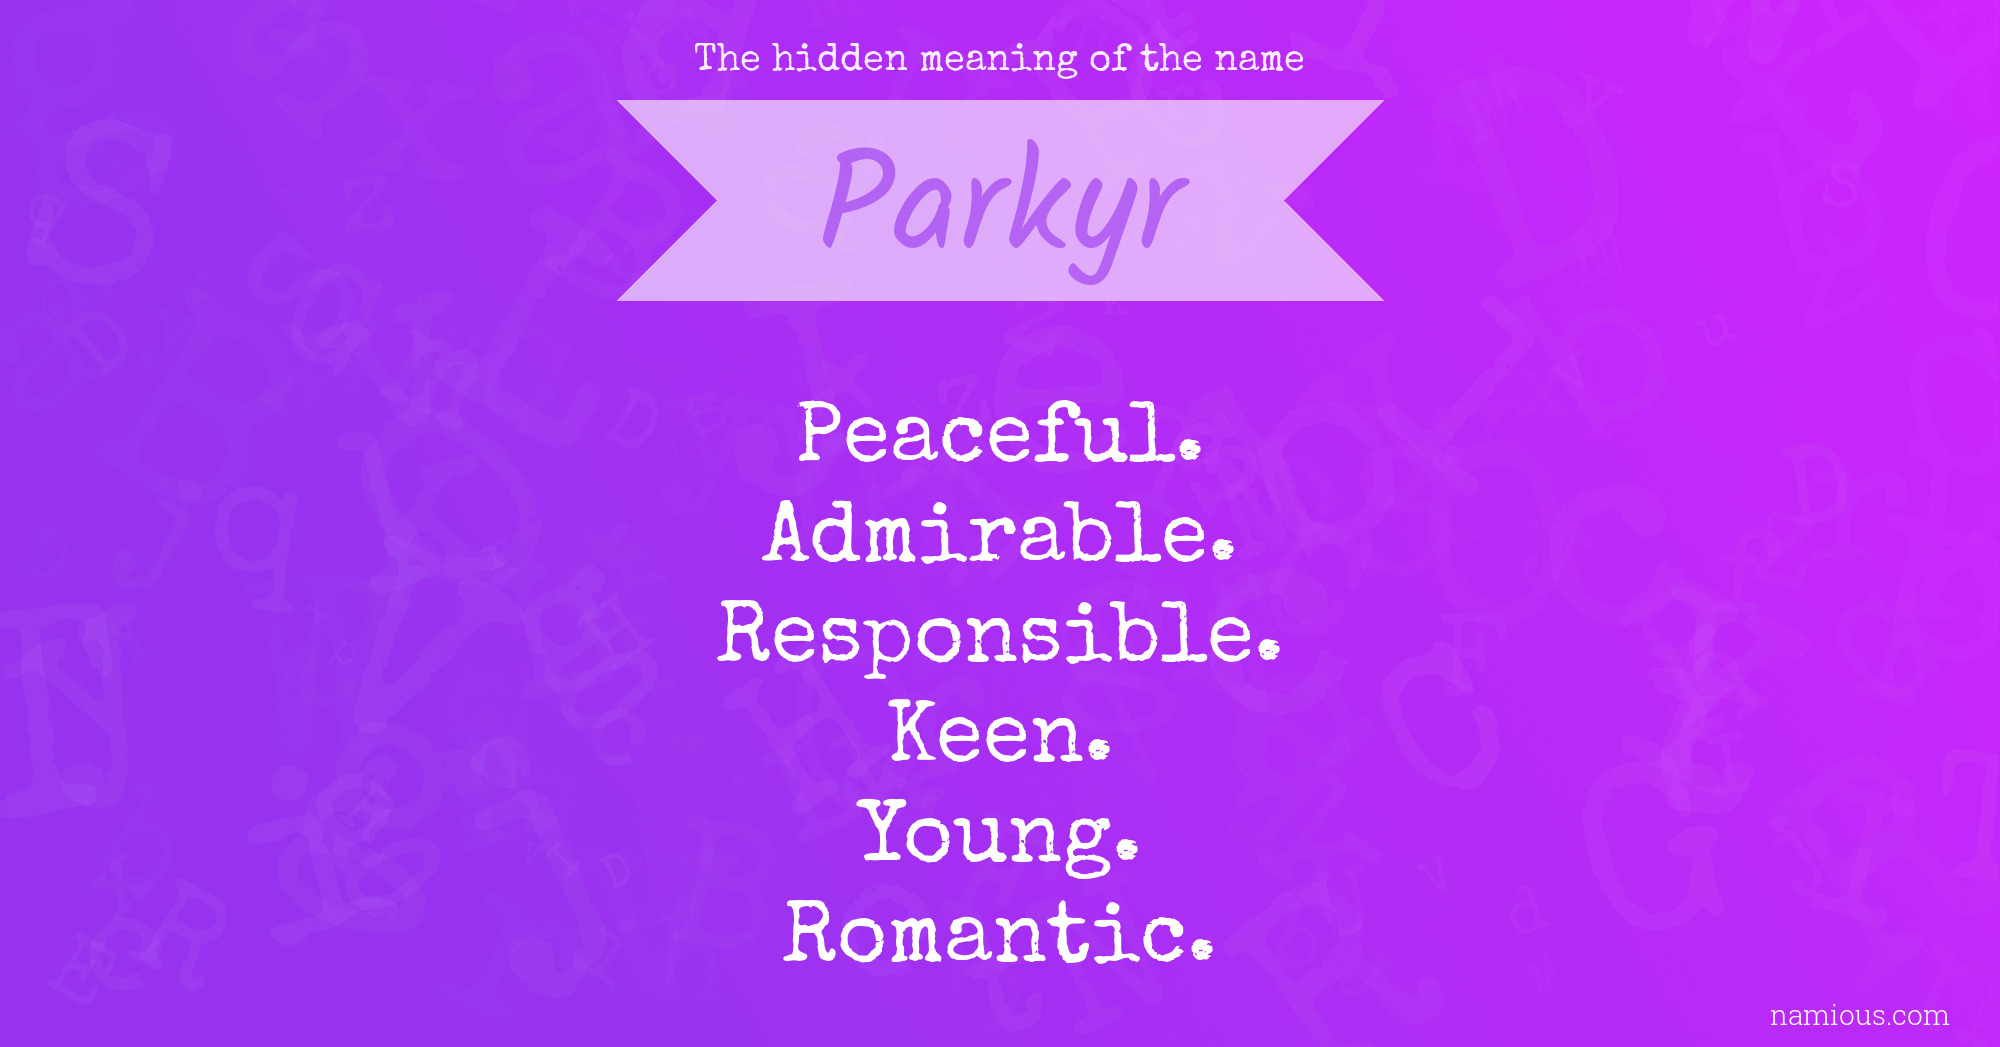 The hidden meaning of the name Parkyr